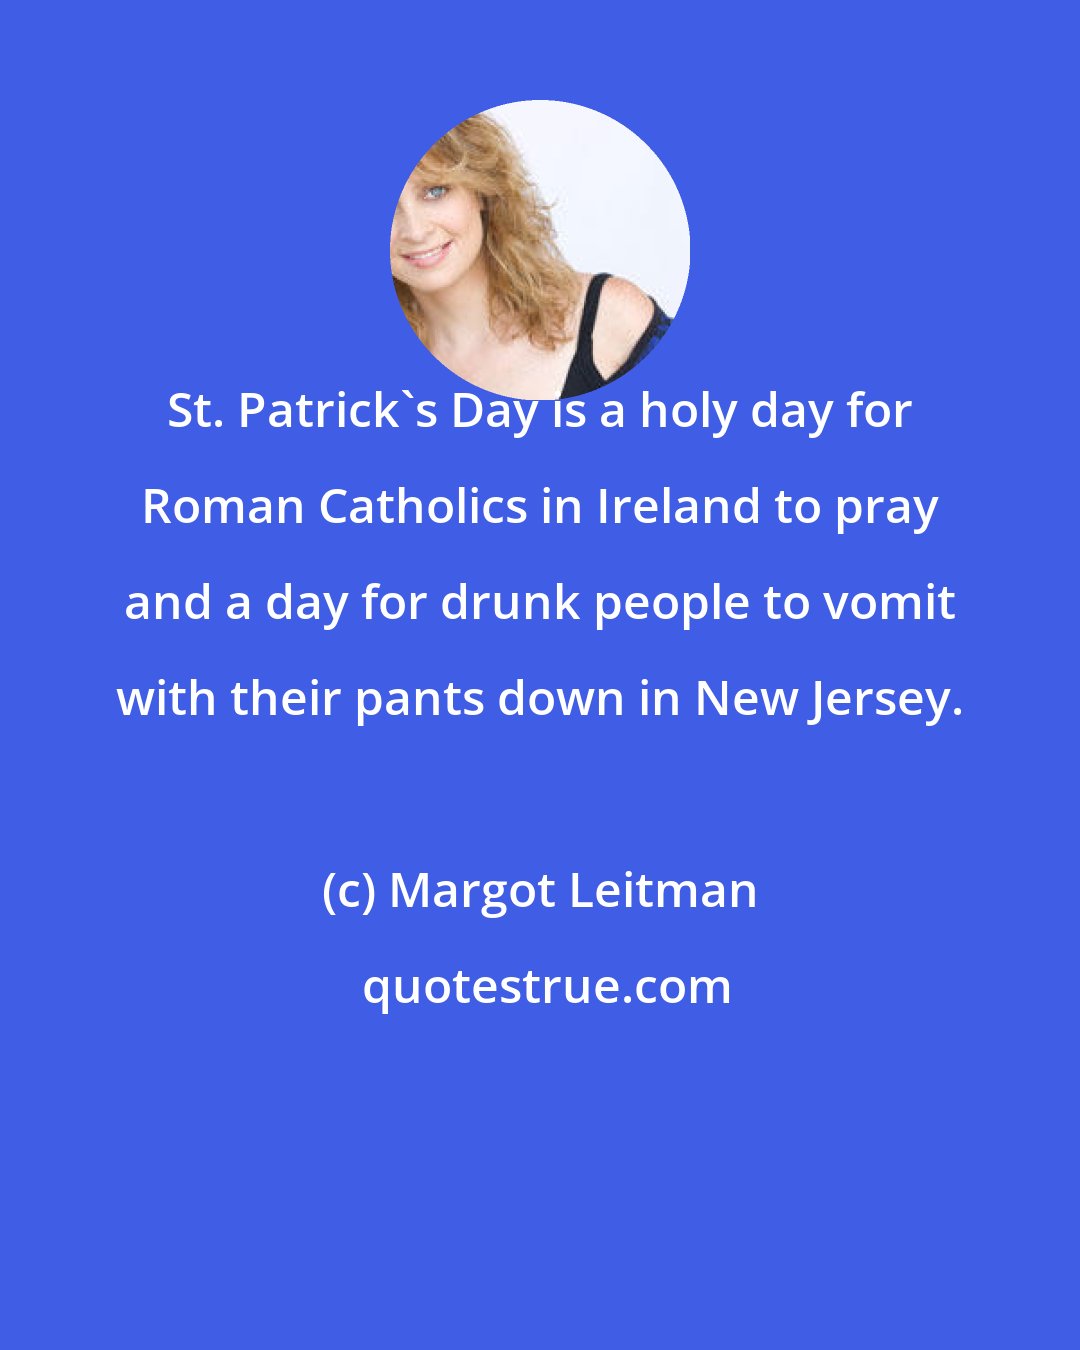 Margot Leitman: St. Patrick's Day is a holy day for Roman Catholics in Ireland to pray and a day for drunk people to vomit with their pants down in New Jersey.